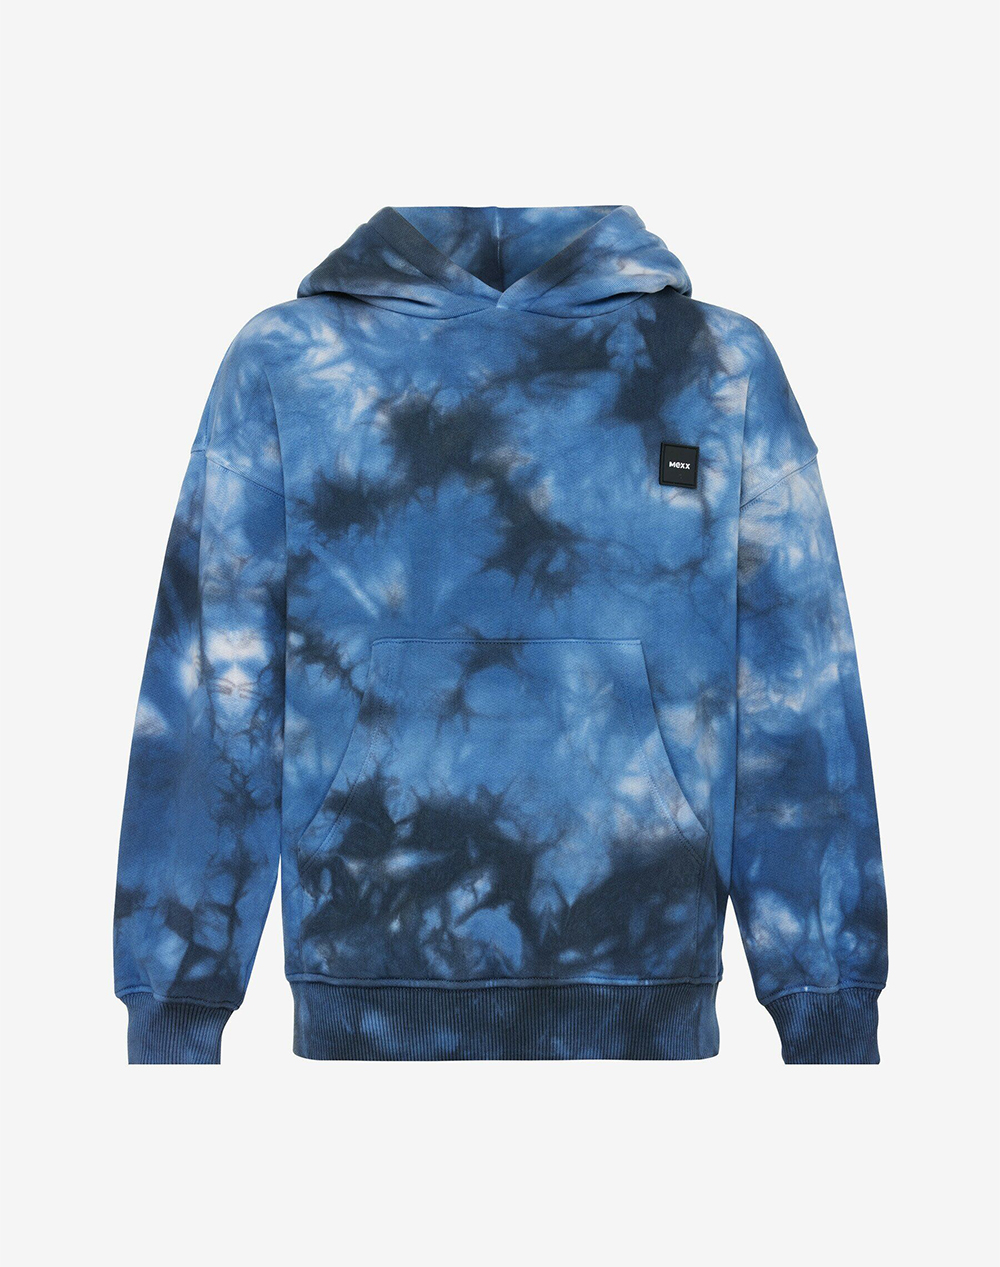 MEXX Hooded sweater with tie dye